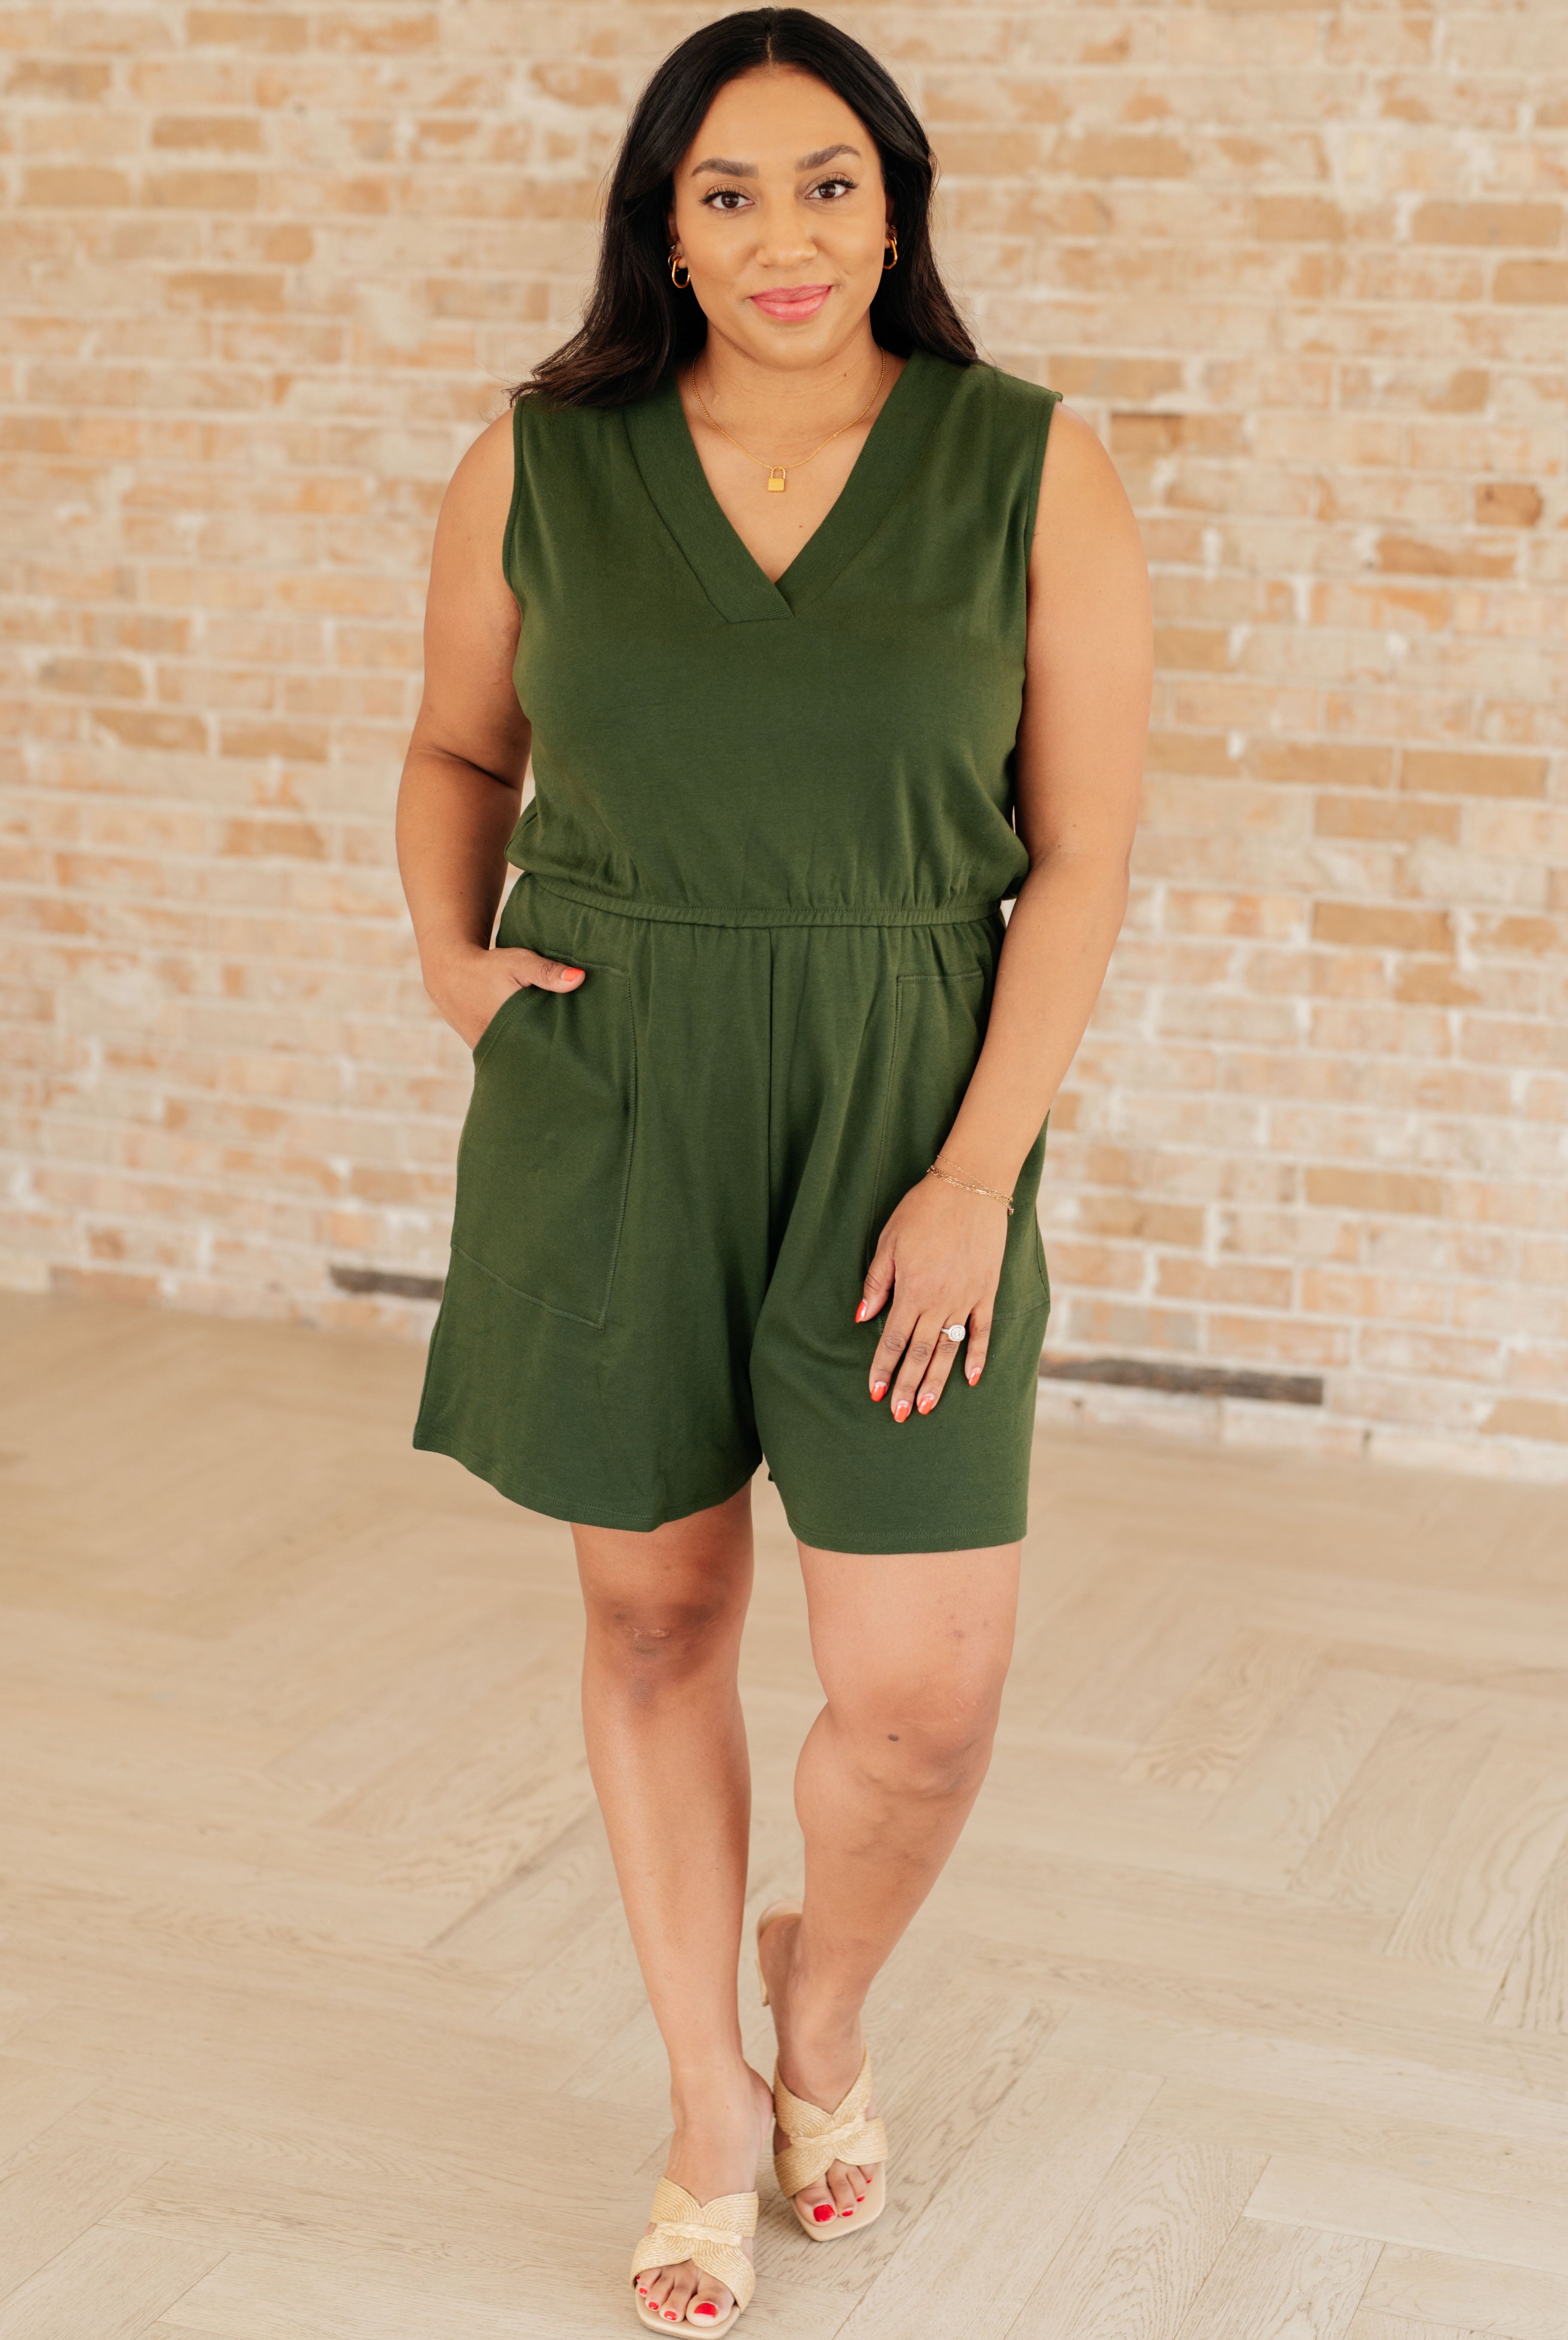 Sleeveless V-Neck Romper in Army Green-Rompers-Ave Shops-Urban Threadz Boutique, Women's Fashion Boutique in Saugatuck, MI